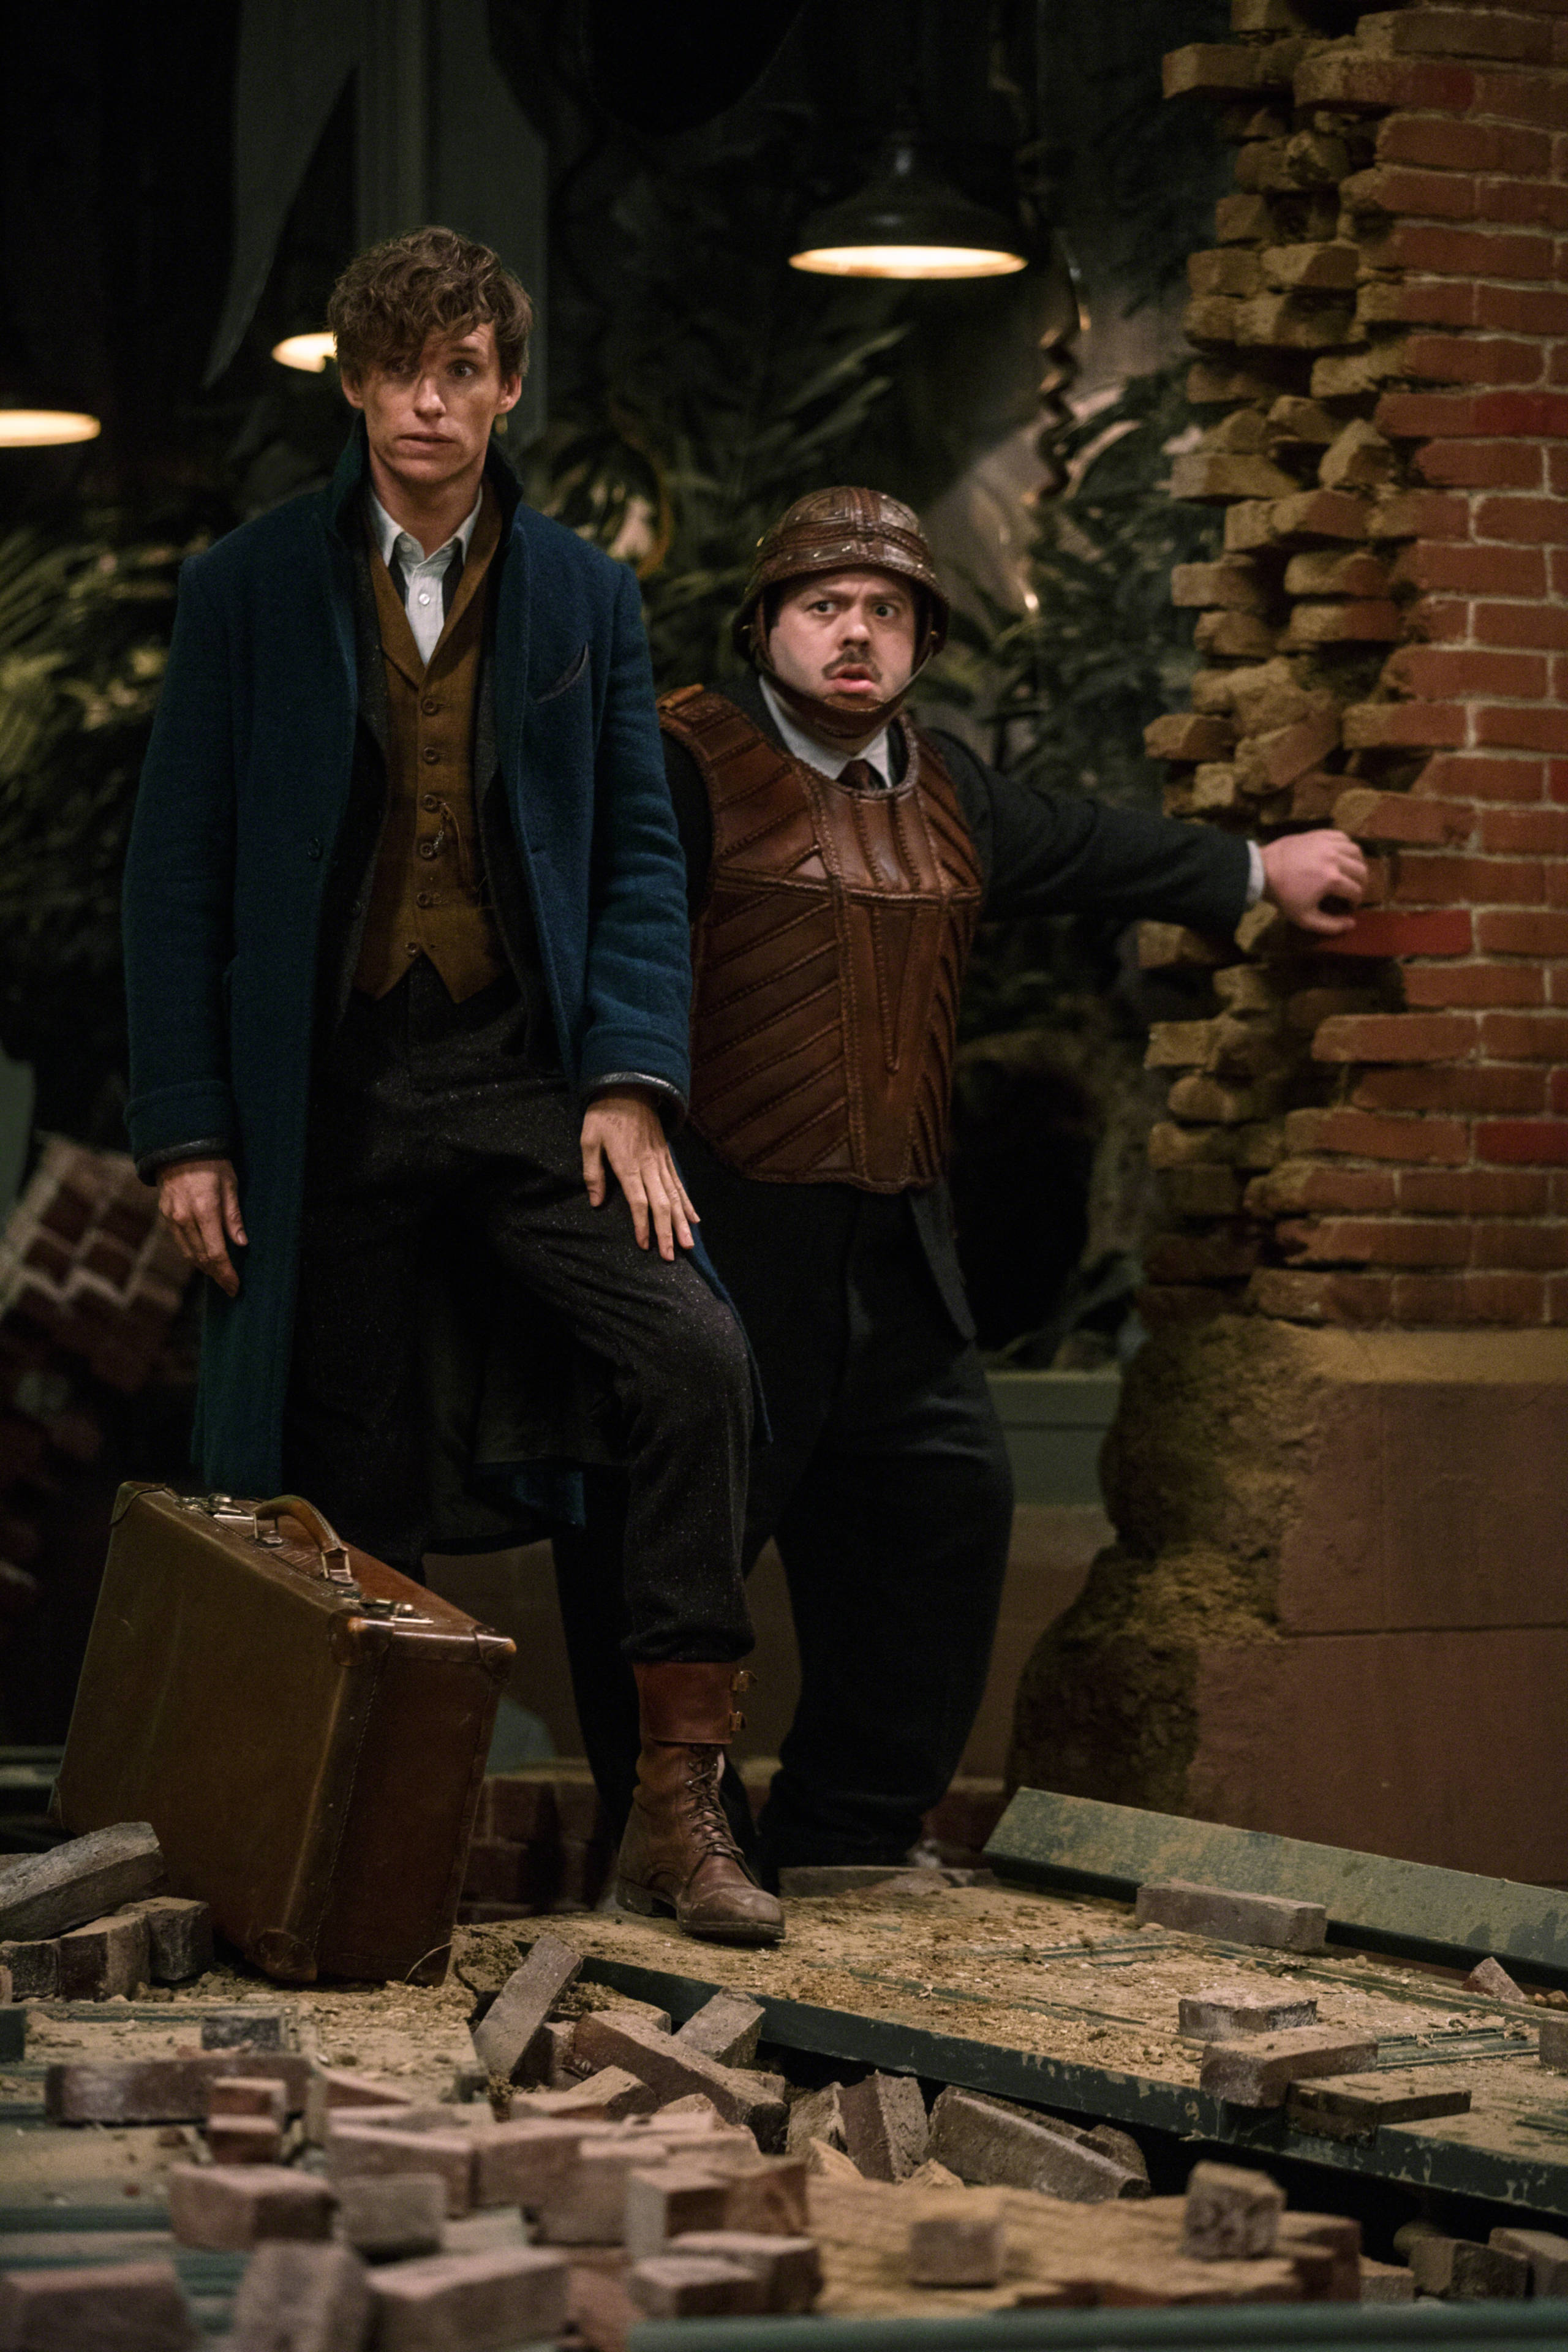 Newt Scamander and Jacob Kowalski survey a scene of destruction in Fantastic Beasts and Where to Find Them